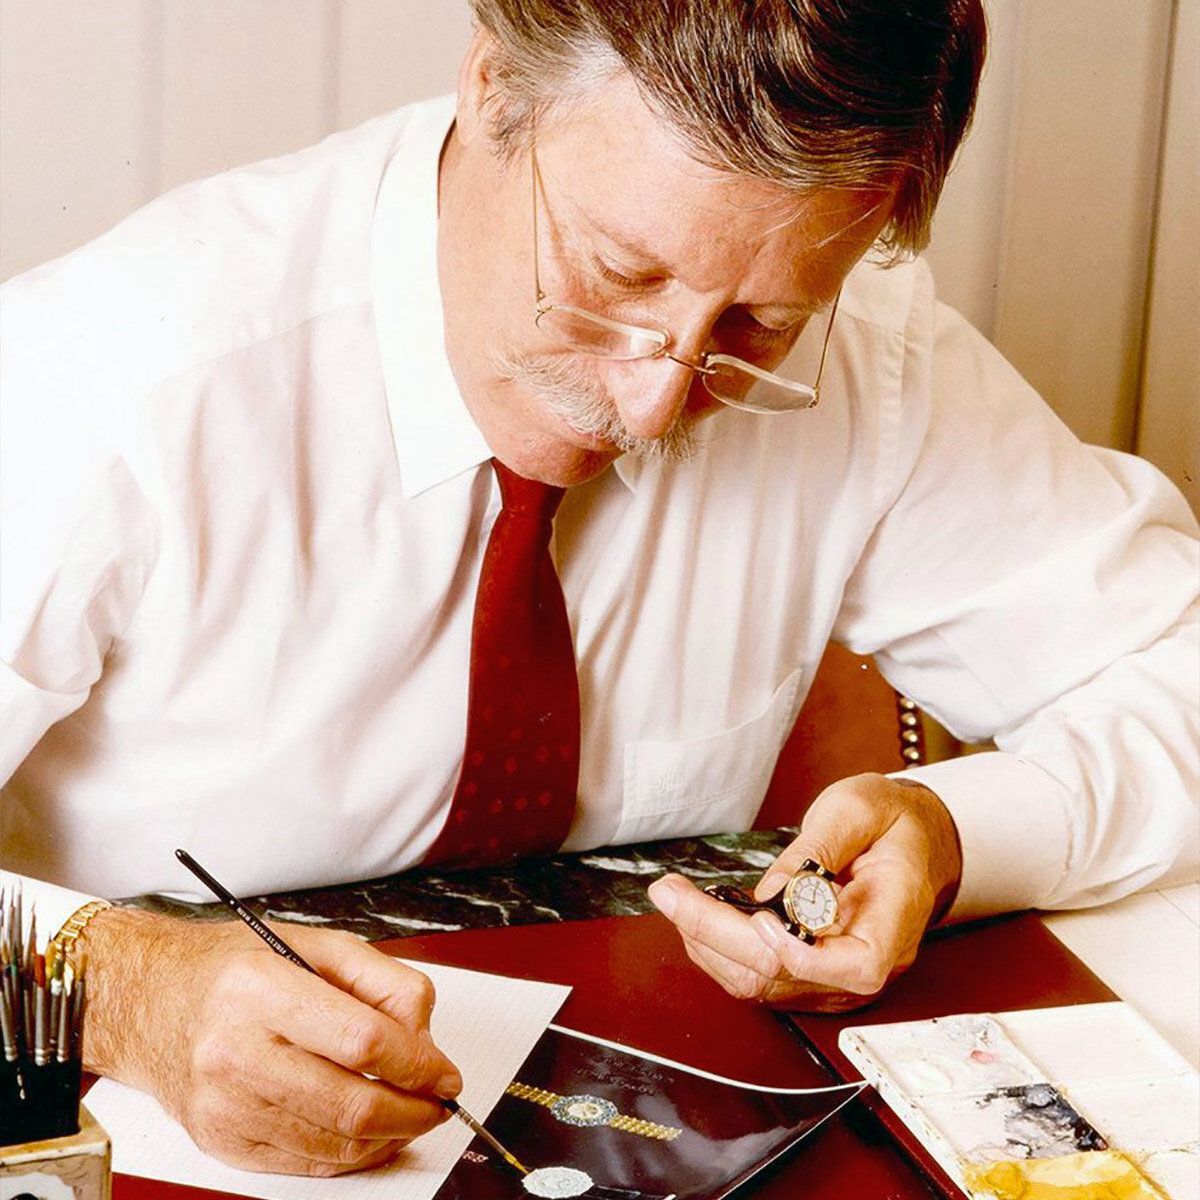 #OnThisDay May 1, 1931: Gérald Charles Genta is born in Geneva. He created the luxury steel sports watch, Audemars Piguet Royal Oak, and the Patek Philippe Nautilus in the 1970s and founded two eponymous companies, Gerald Genta and Gerald Charles. @GeraldGentaH #BornToday